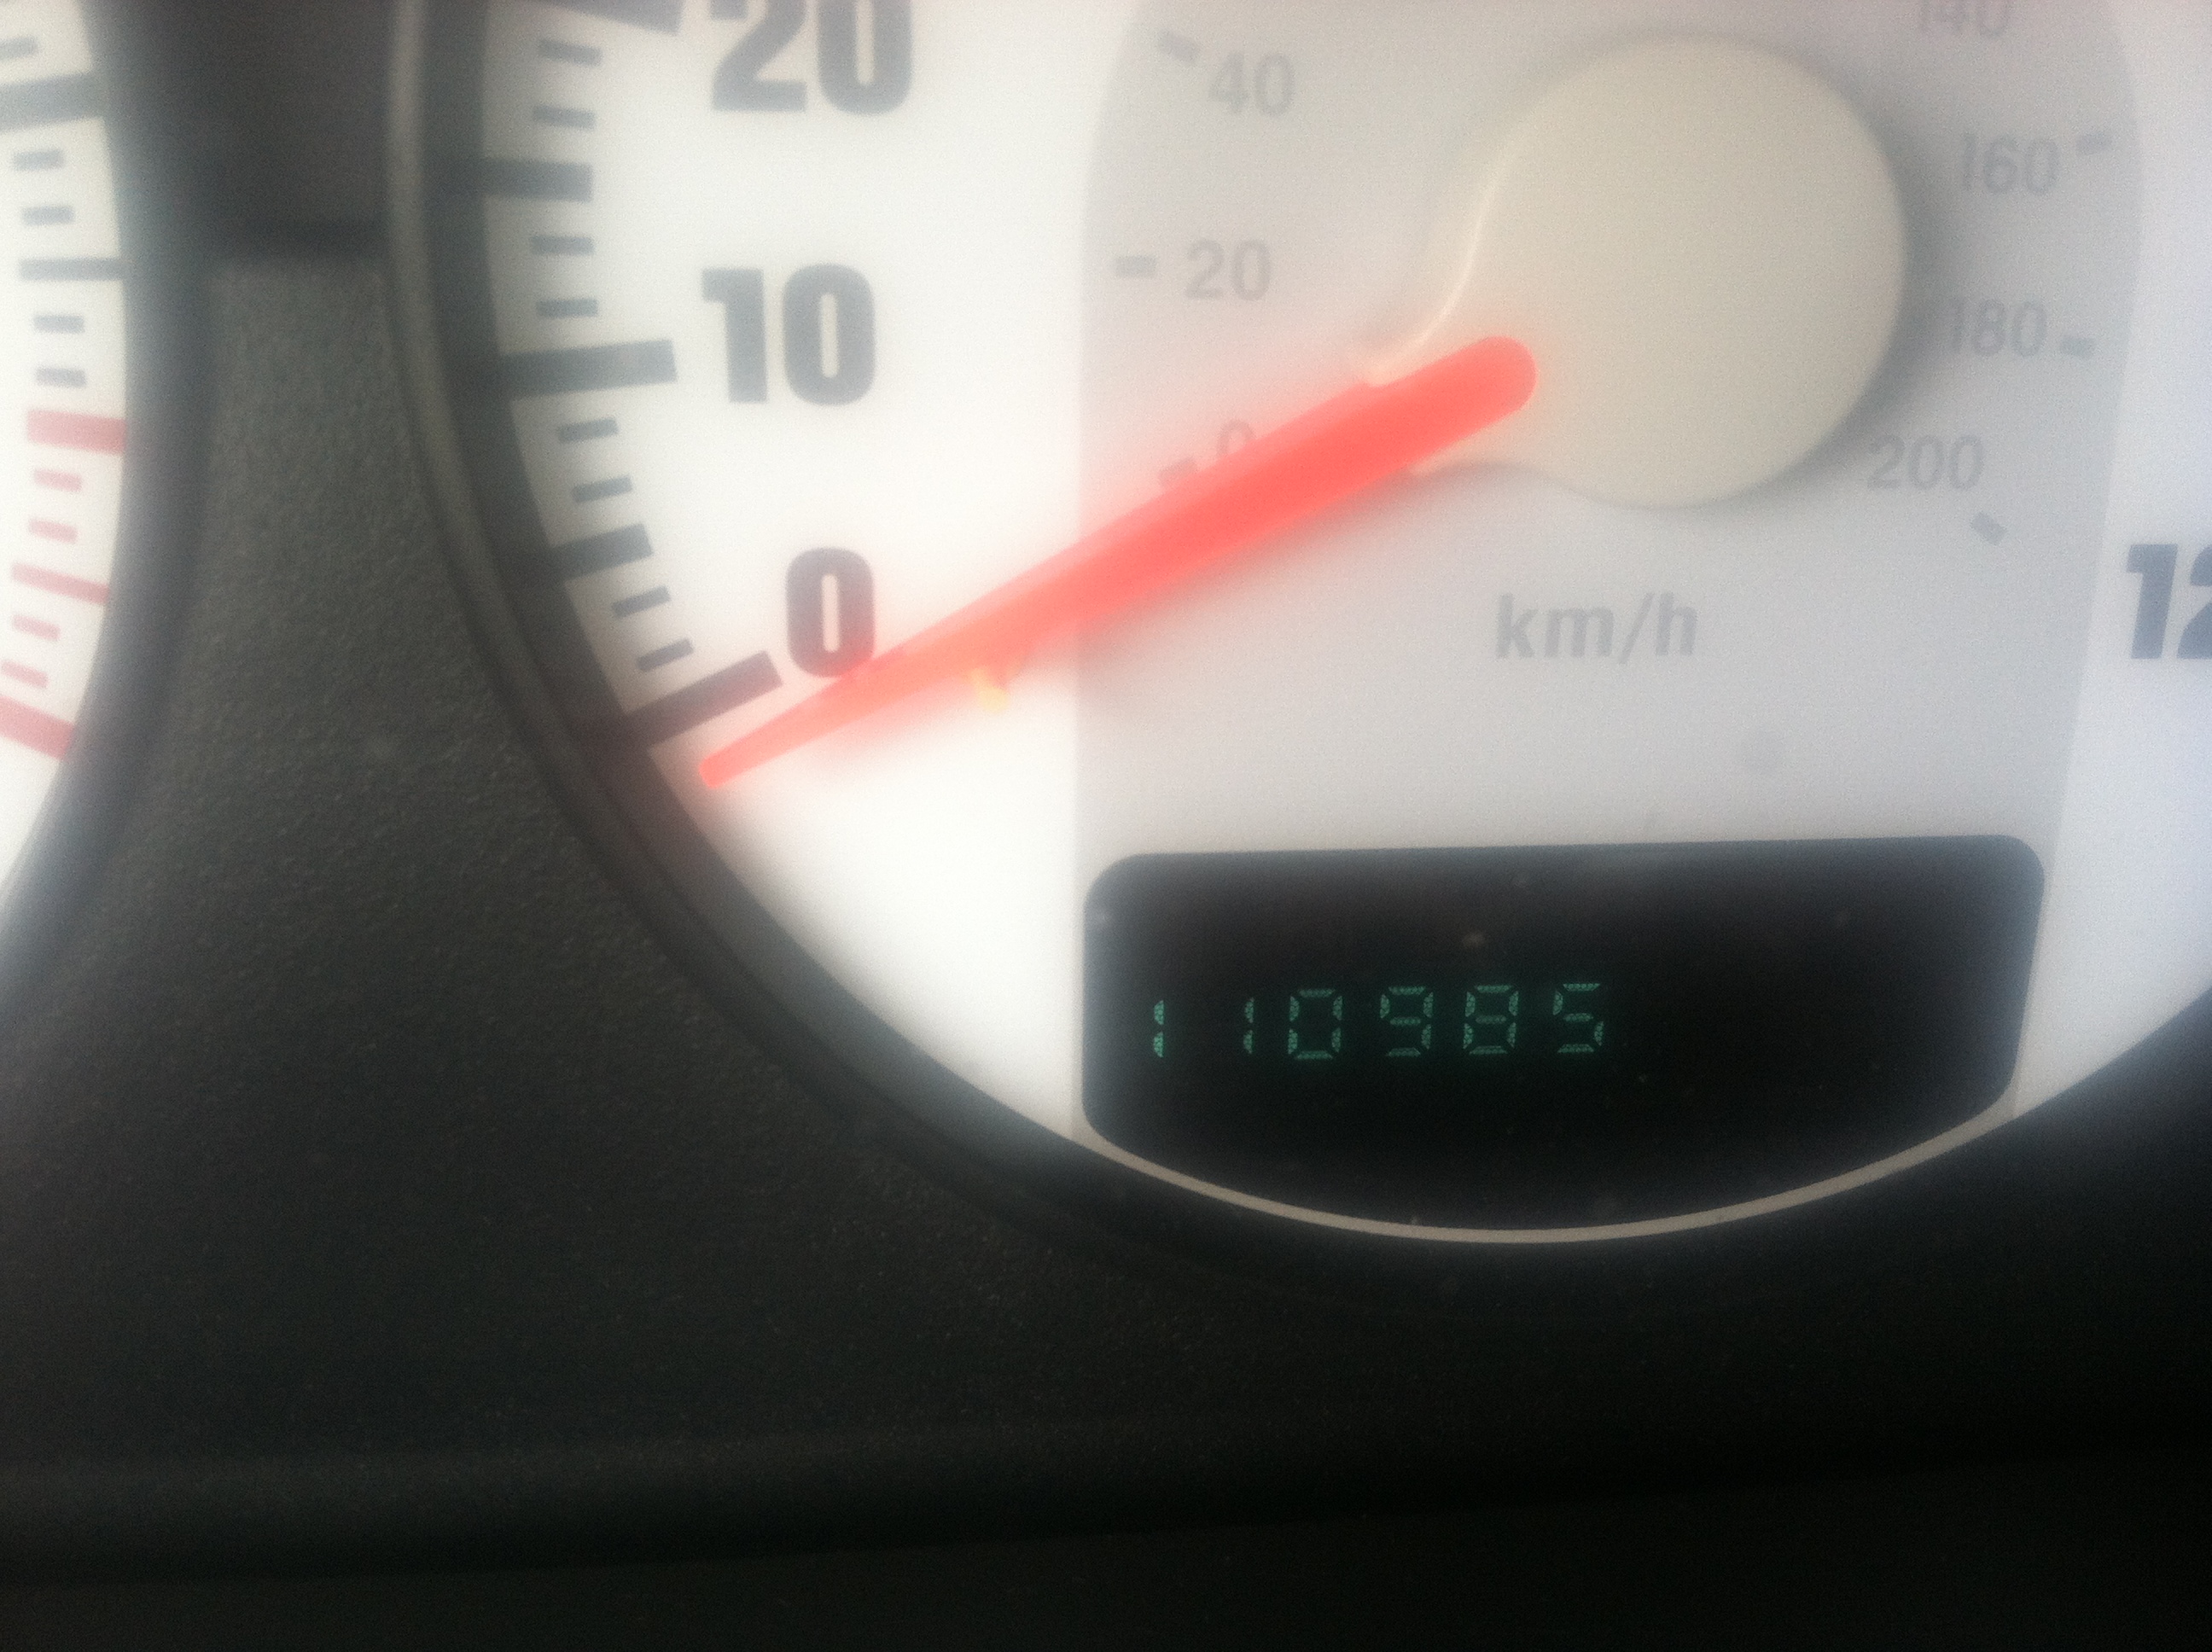 My actual mileage, despite what my receipt actually says